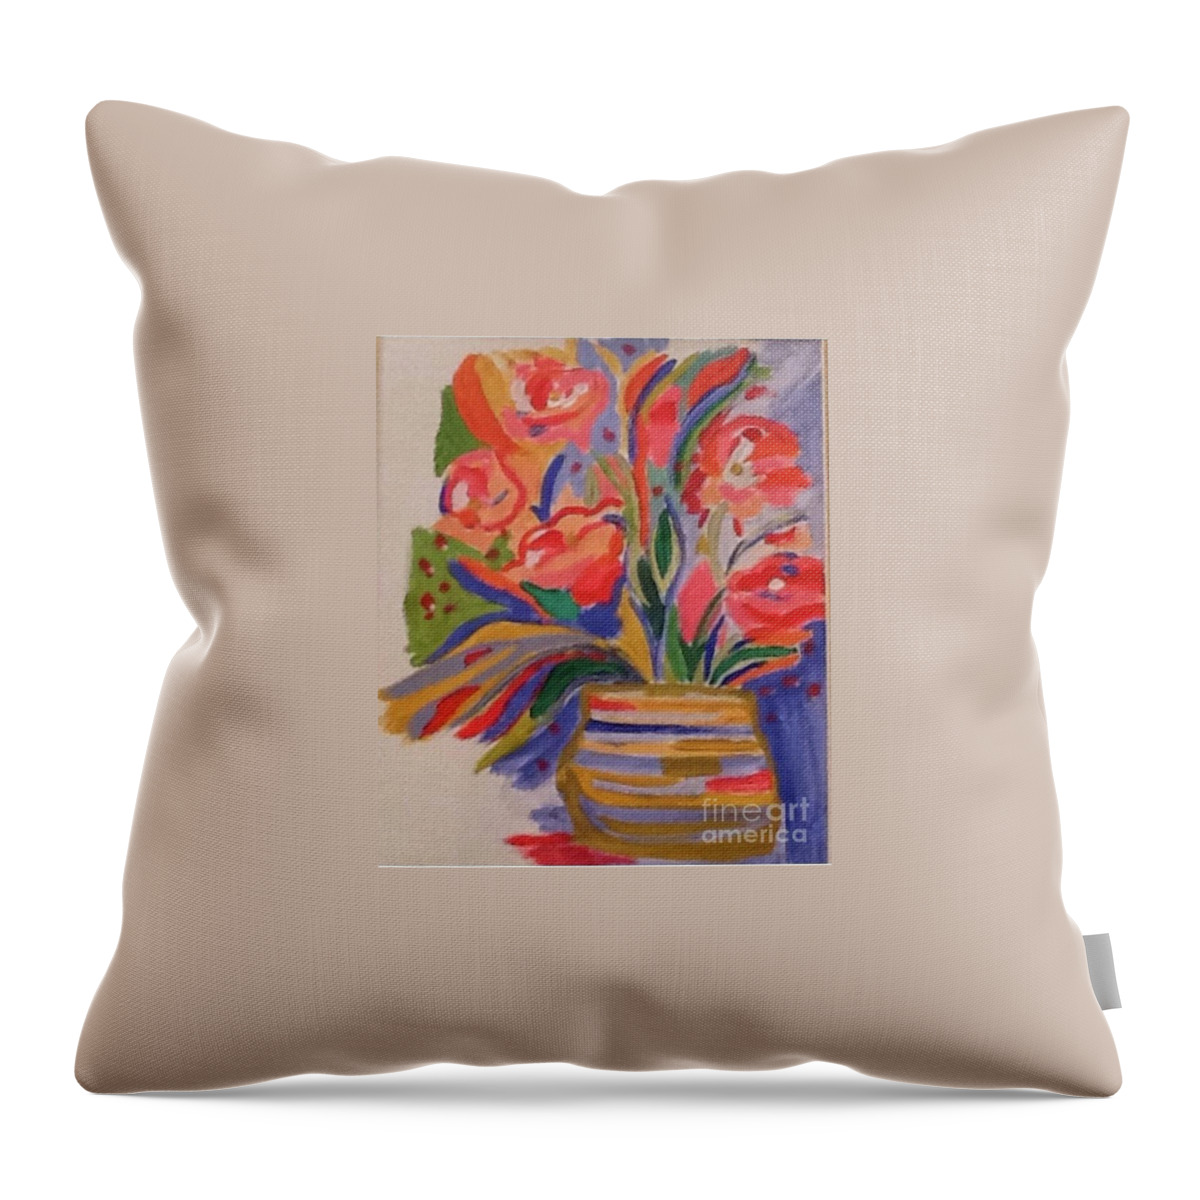 Original Art Work Throw Pillow featuring the painting Vase of Flowers by Theresa Honeycheck